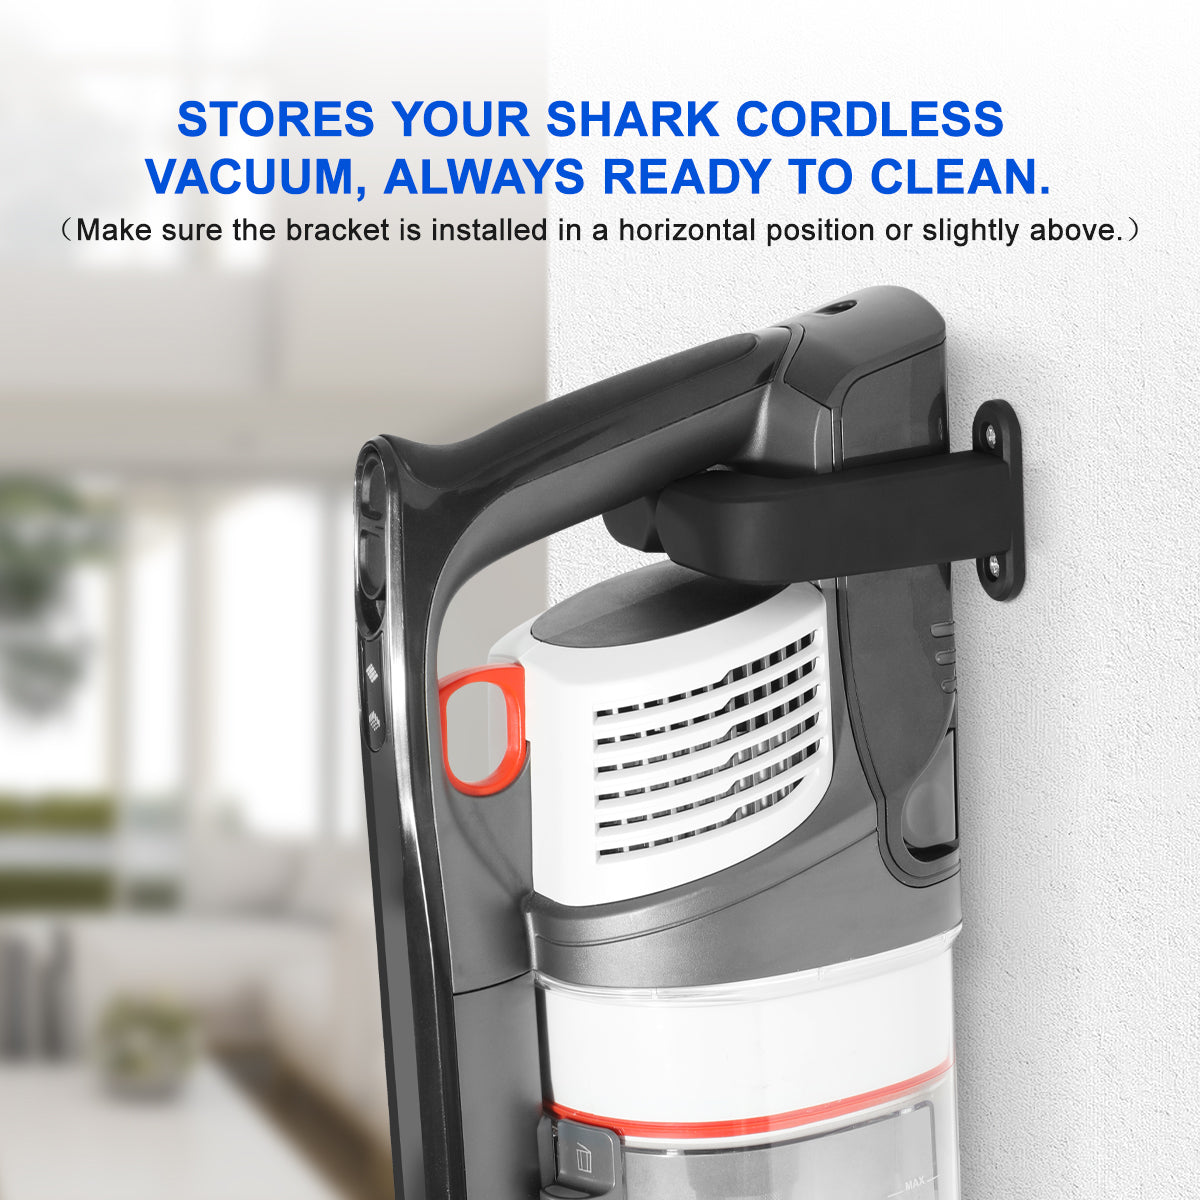 stores your shark cordless vacuum, always ready to clean